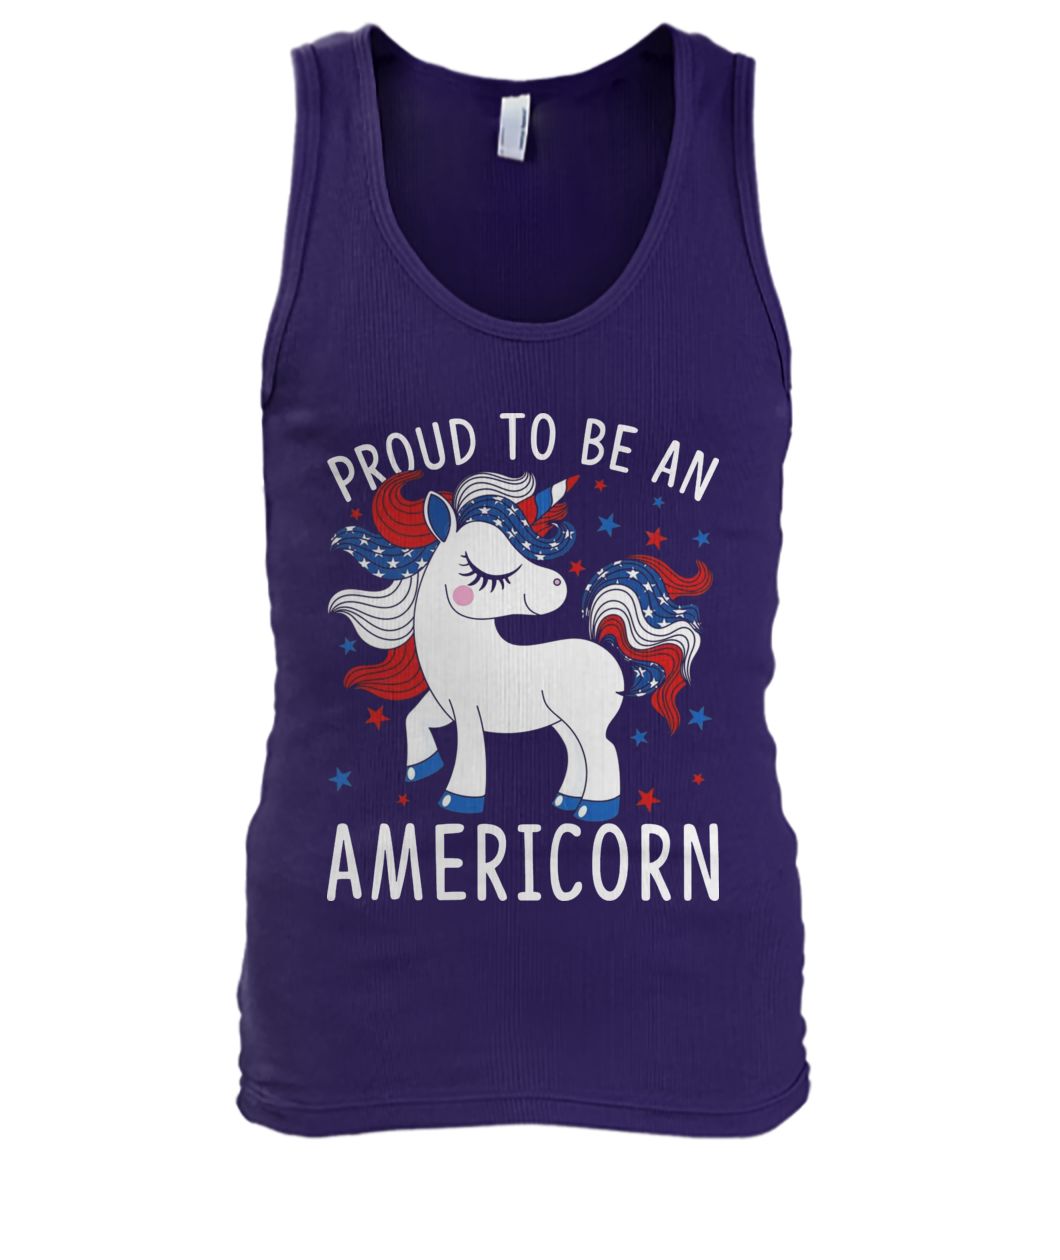 Proud to be an americorn 4th of july men's tank top